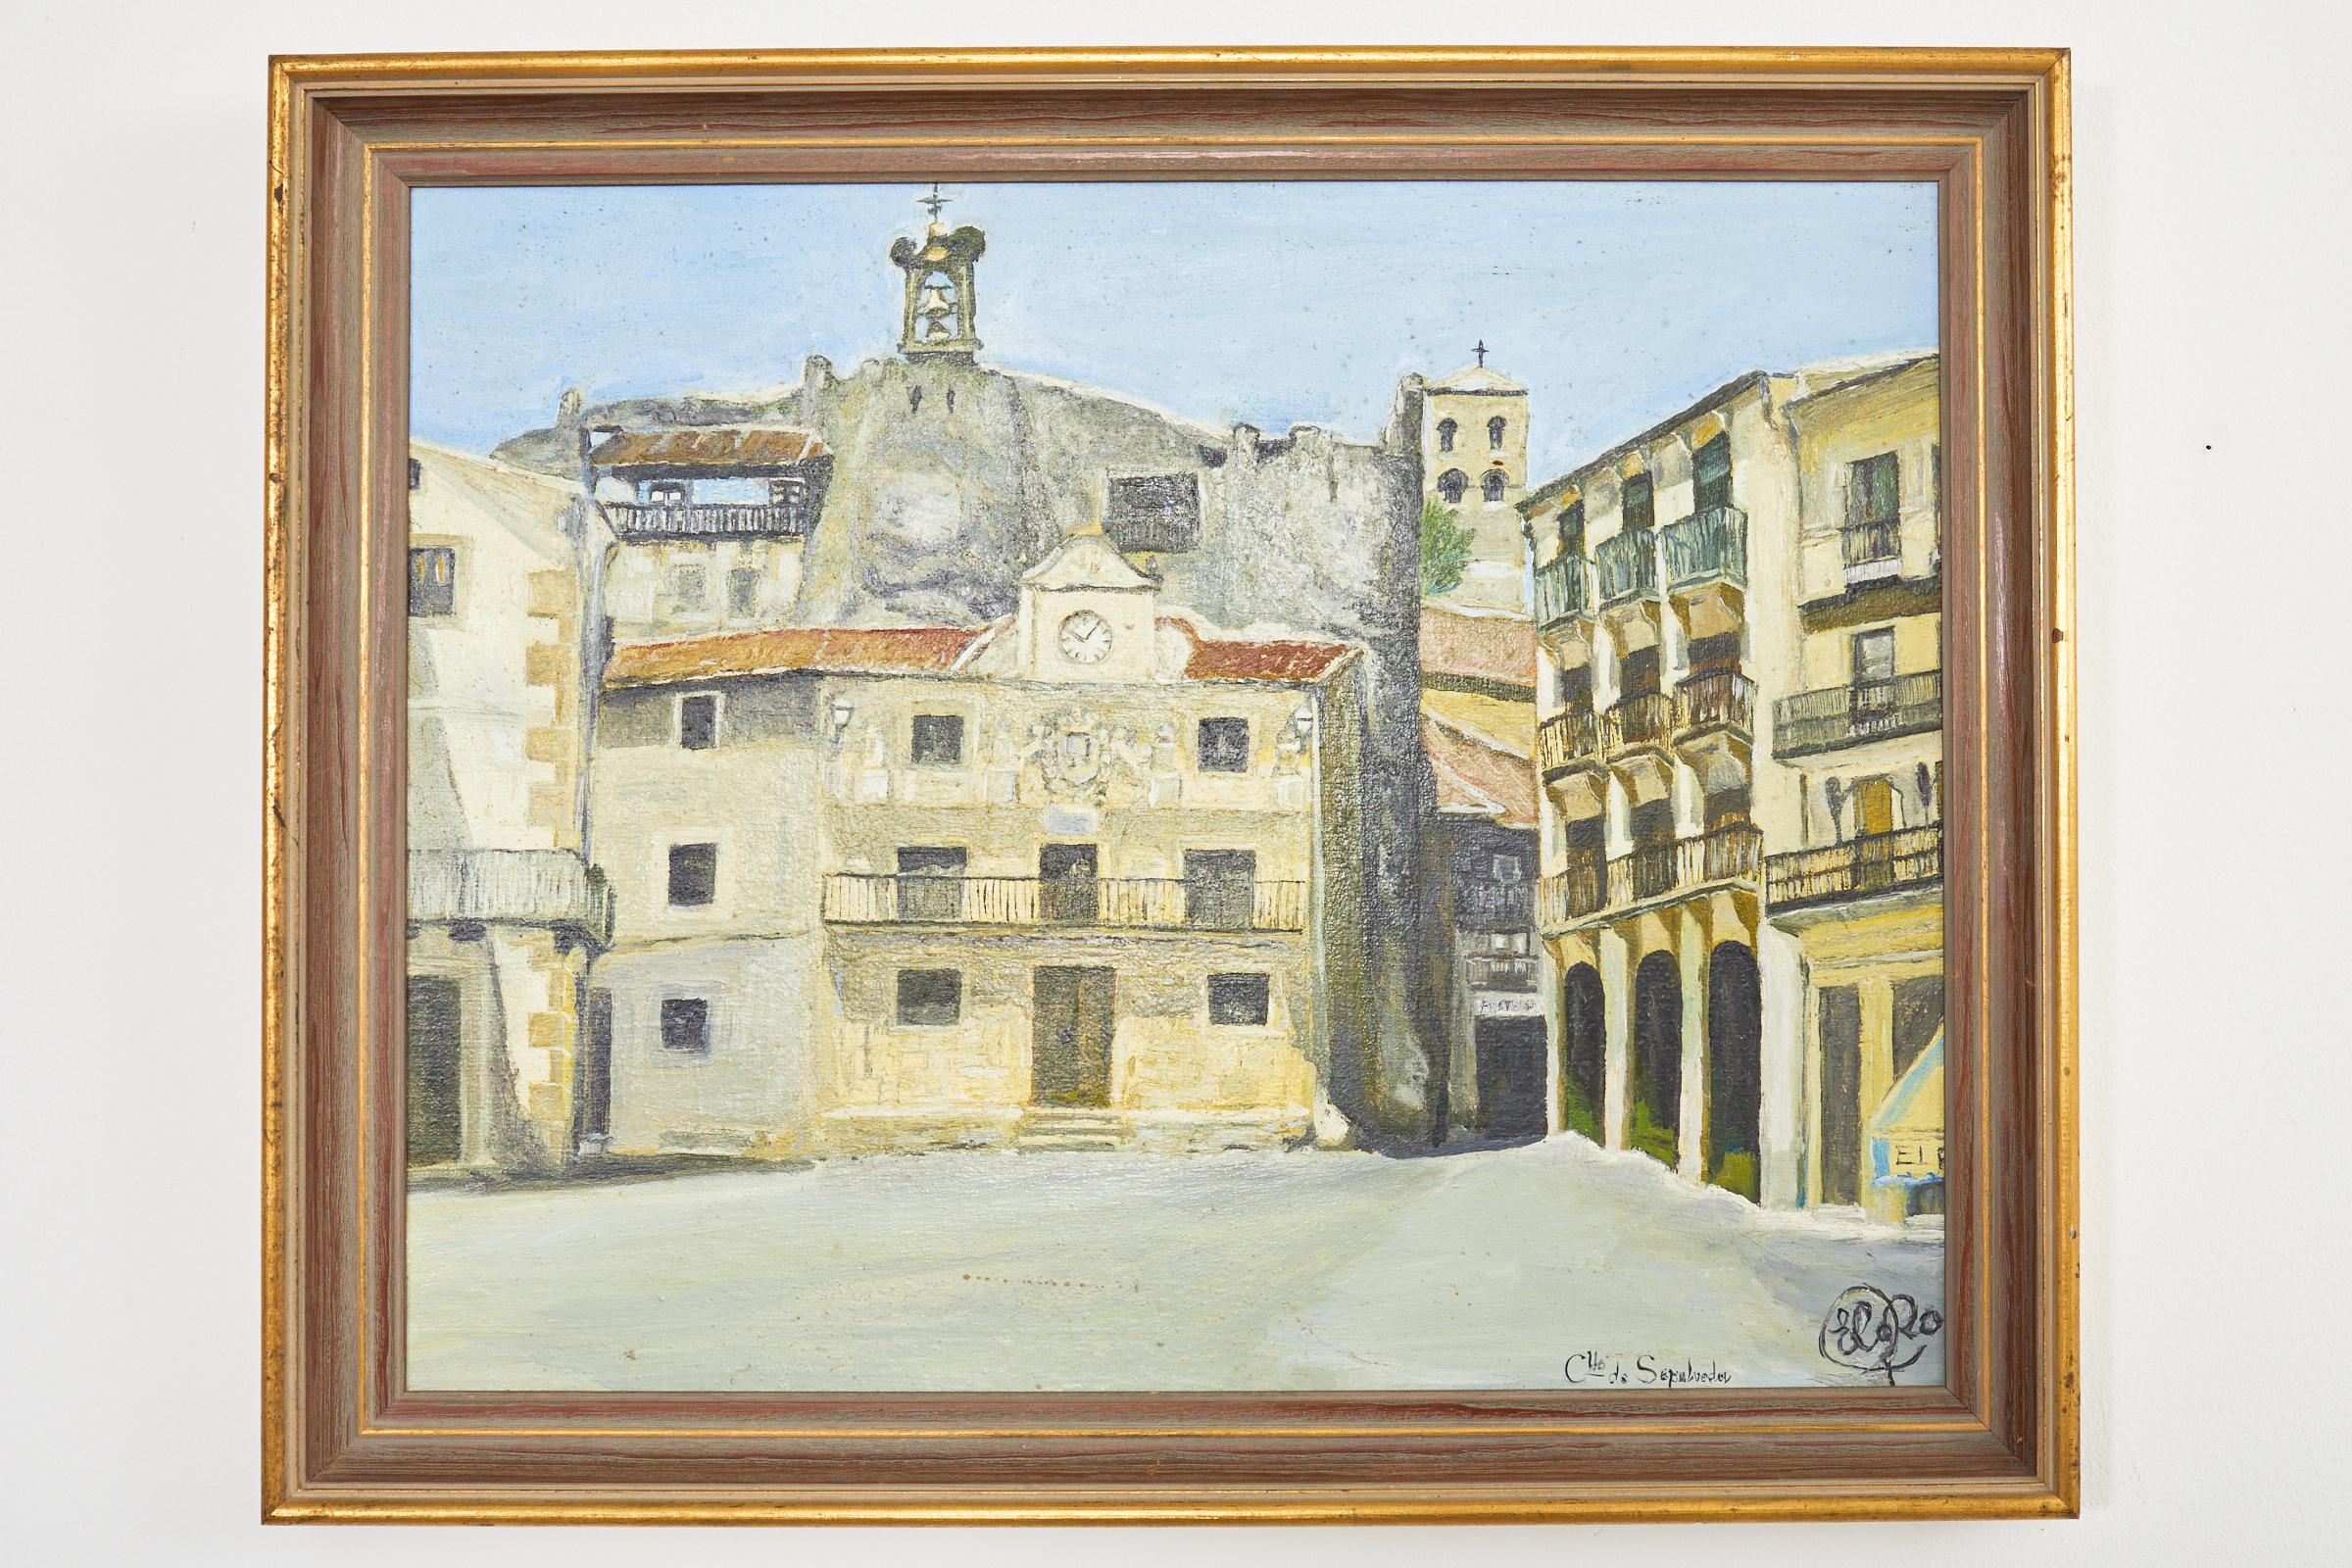 Gilt Midcentury Modern Italian Impressionist Town Square For Sale